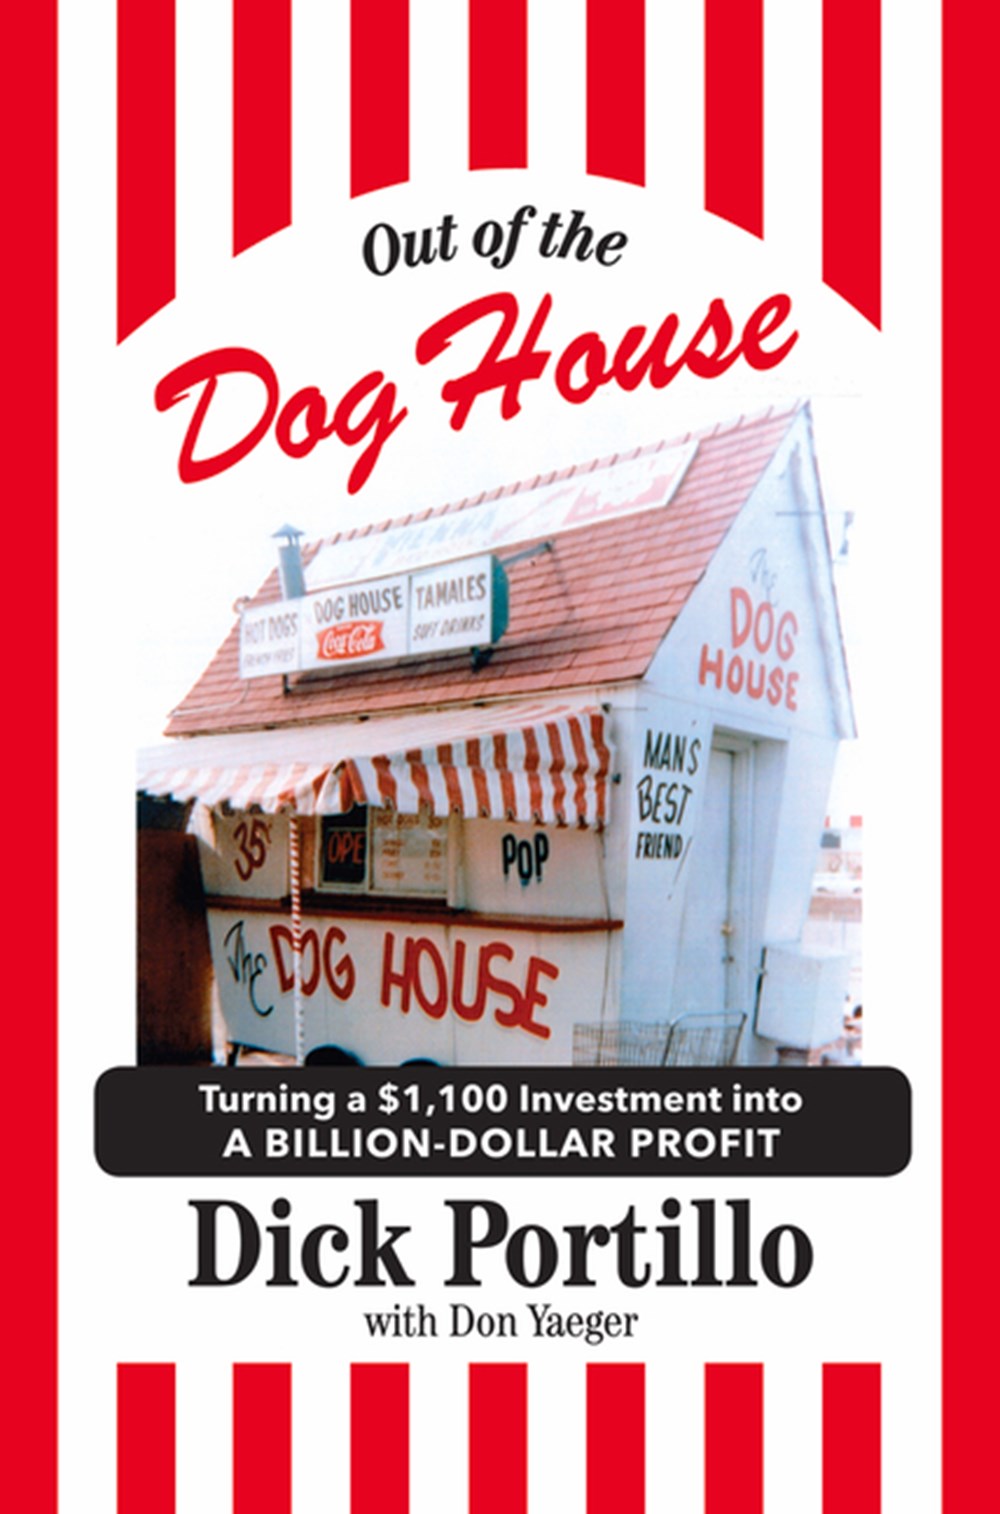 Out of the Dog House Turning a $1,100 Investment Into a Billion-Dollar Profit